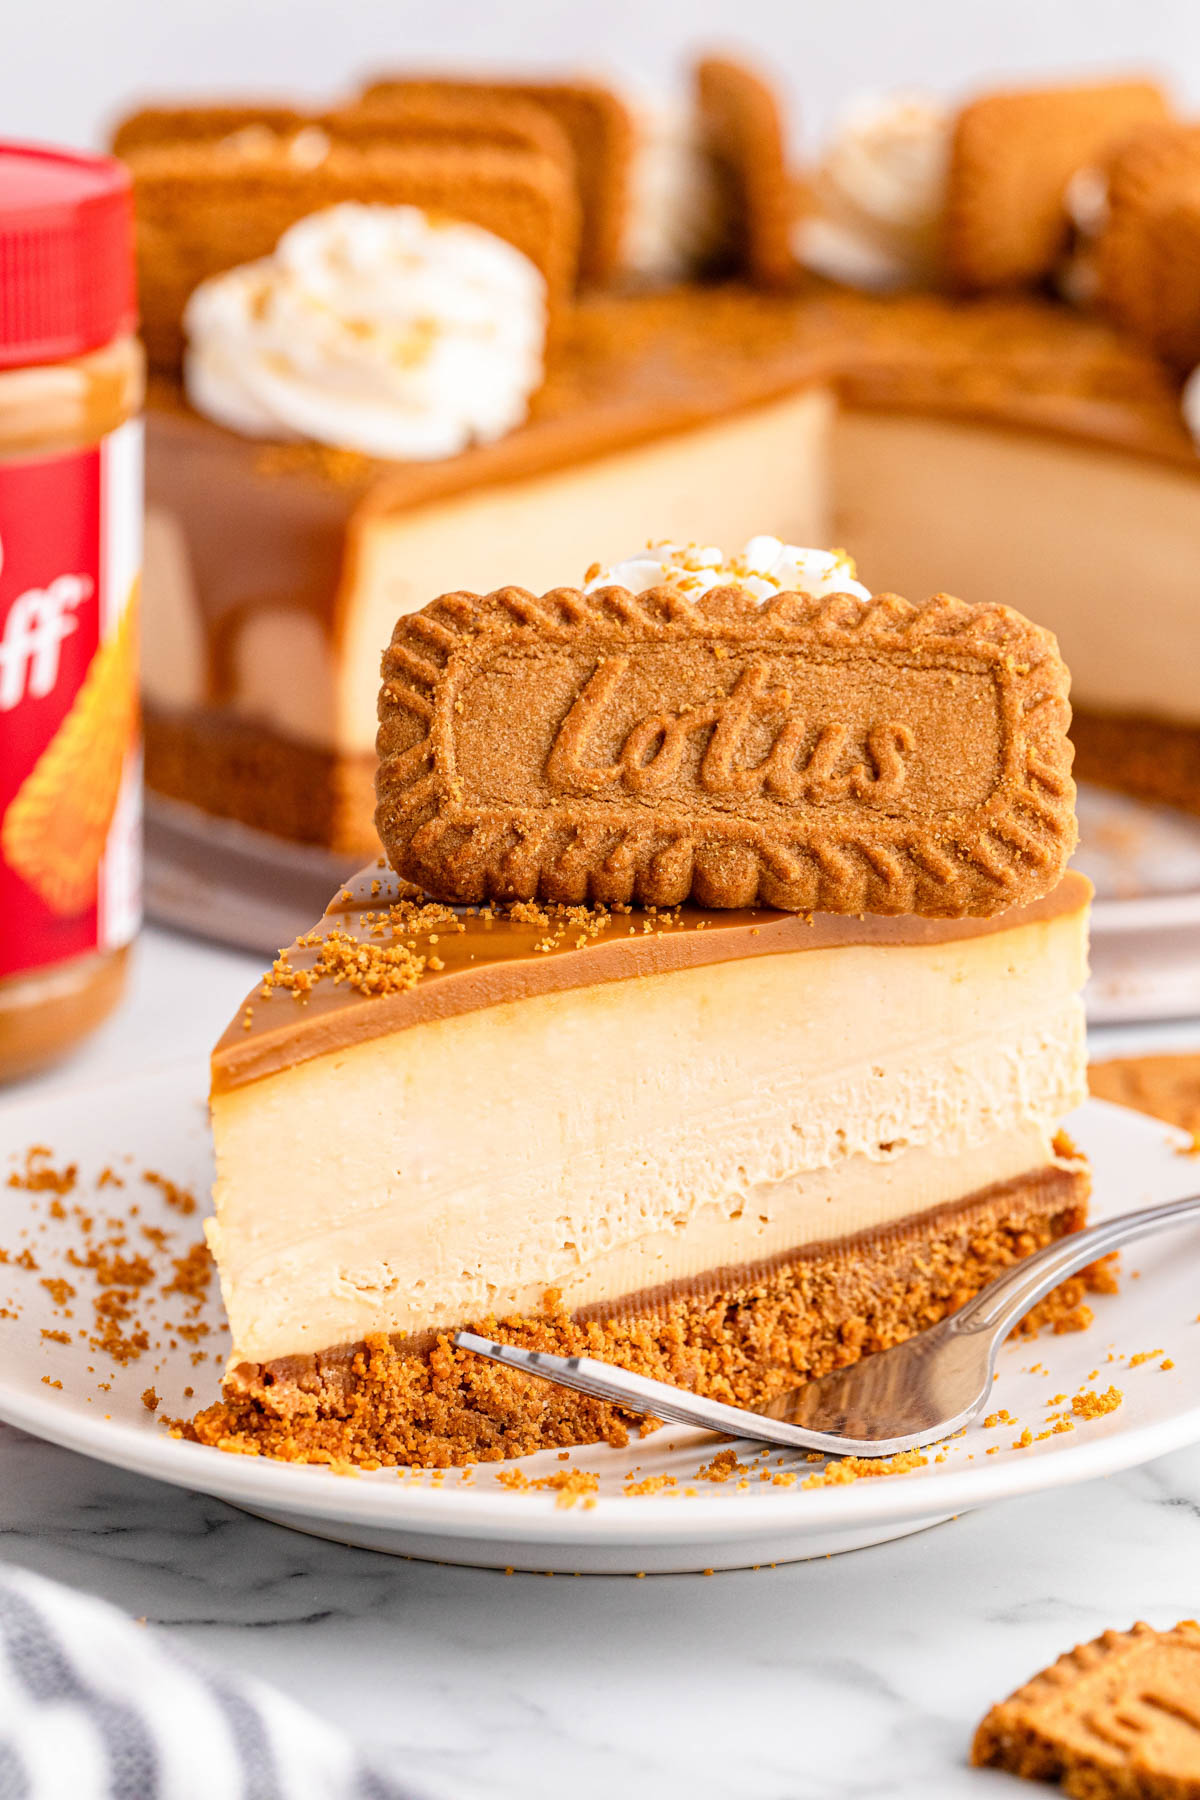 A slice of Biscoff cheesecake on a plate with a jar of Biscoff spread